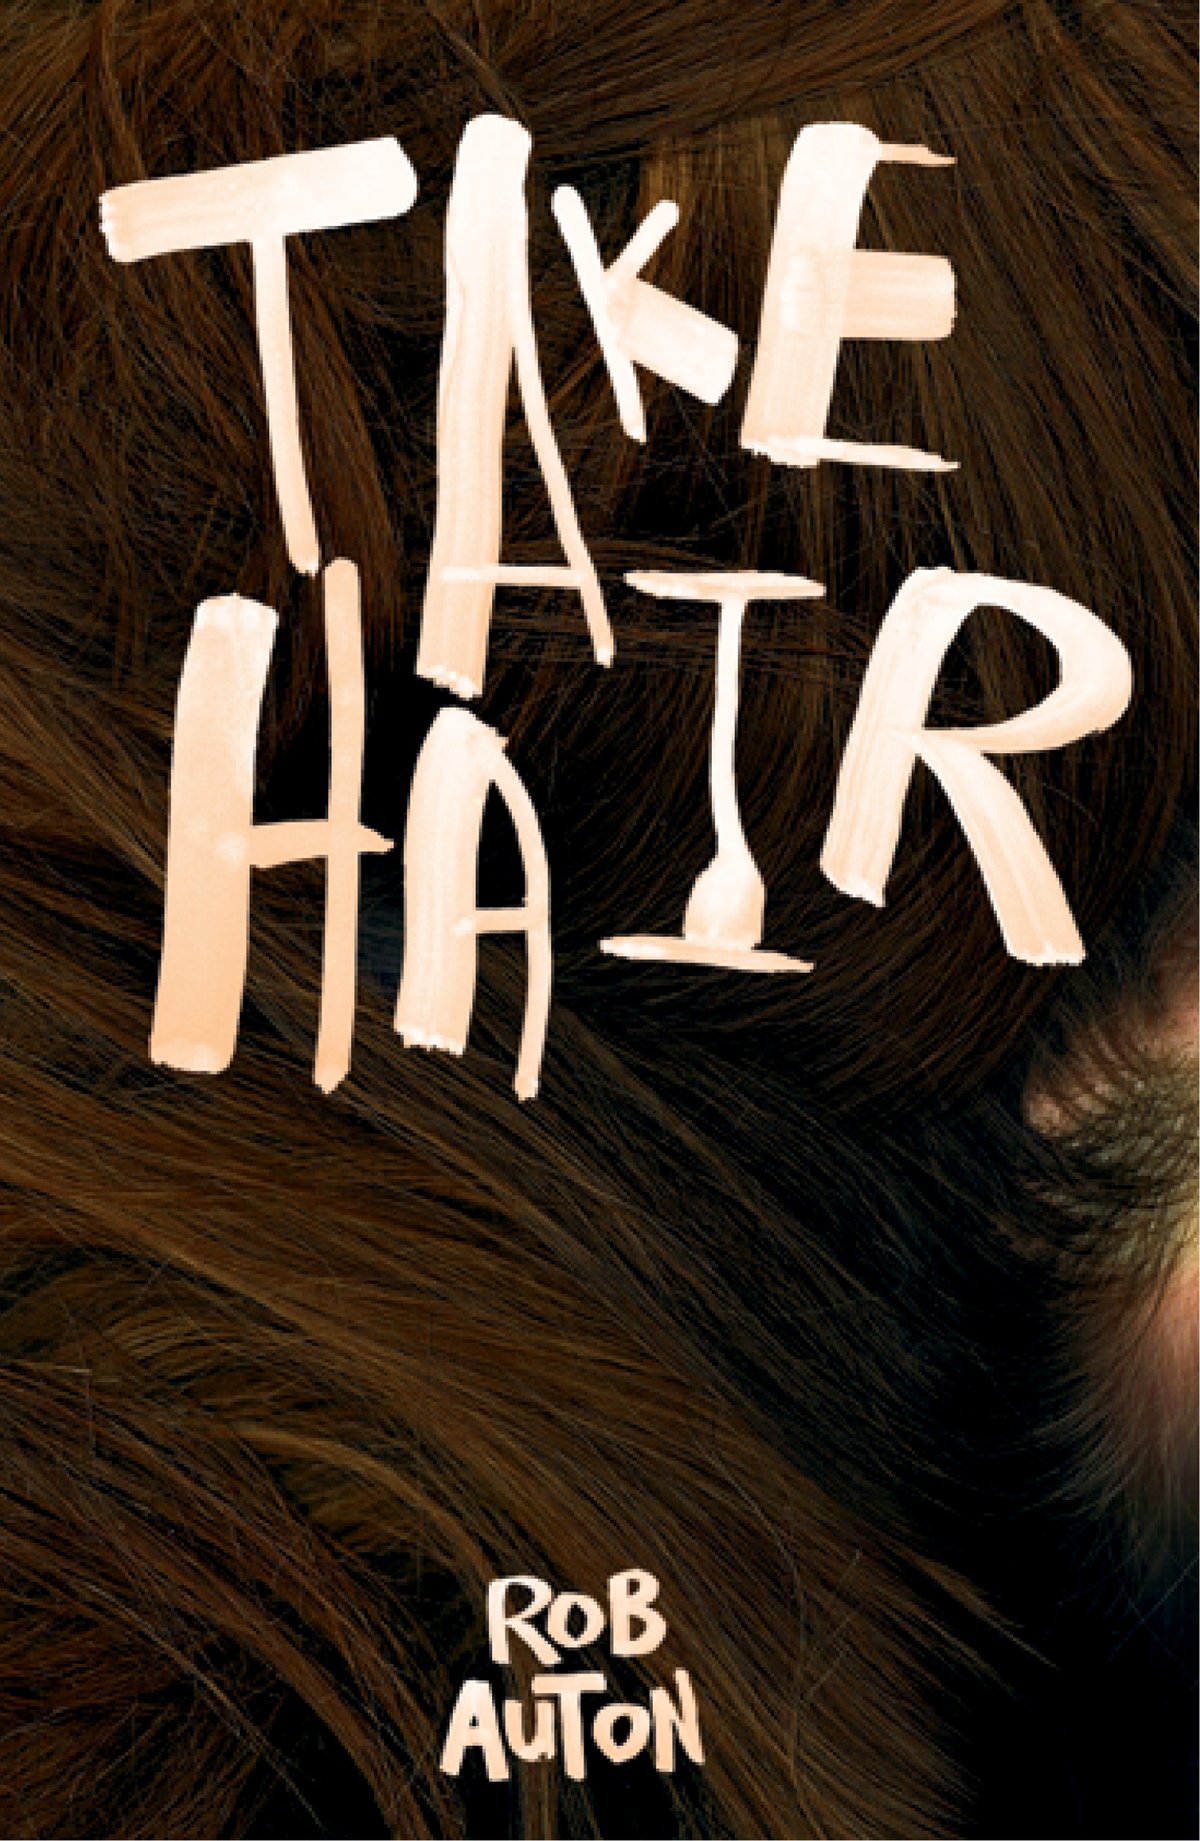 Image of Take Hair by Rob Auton